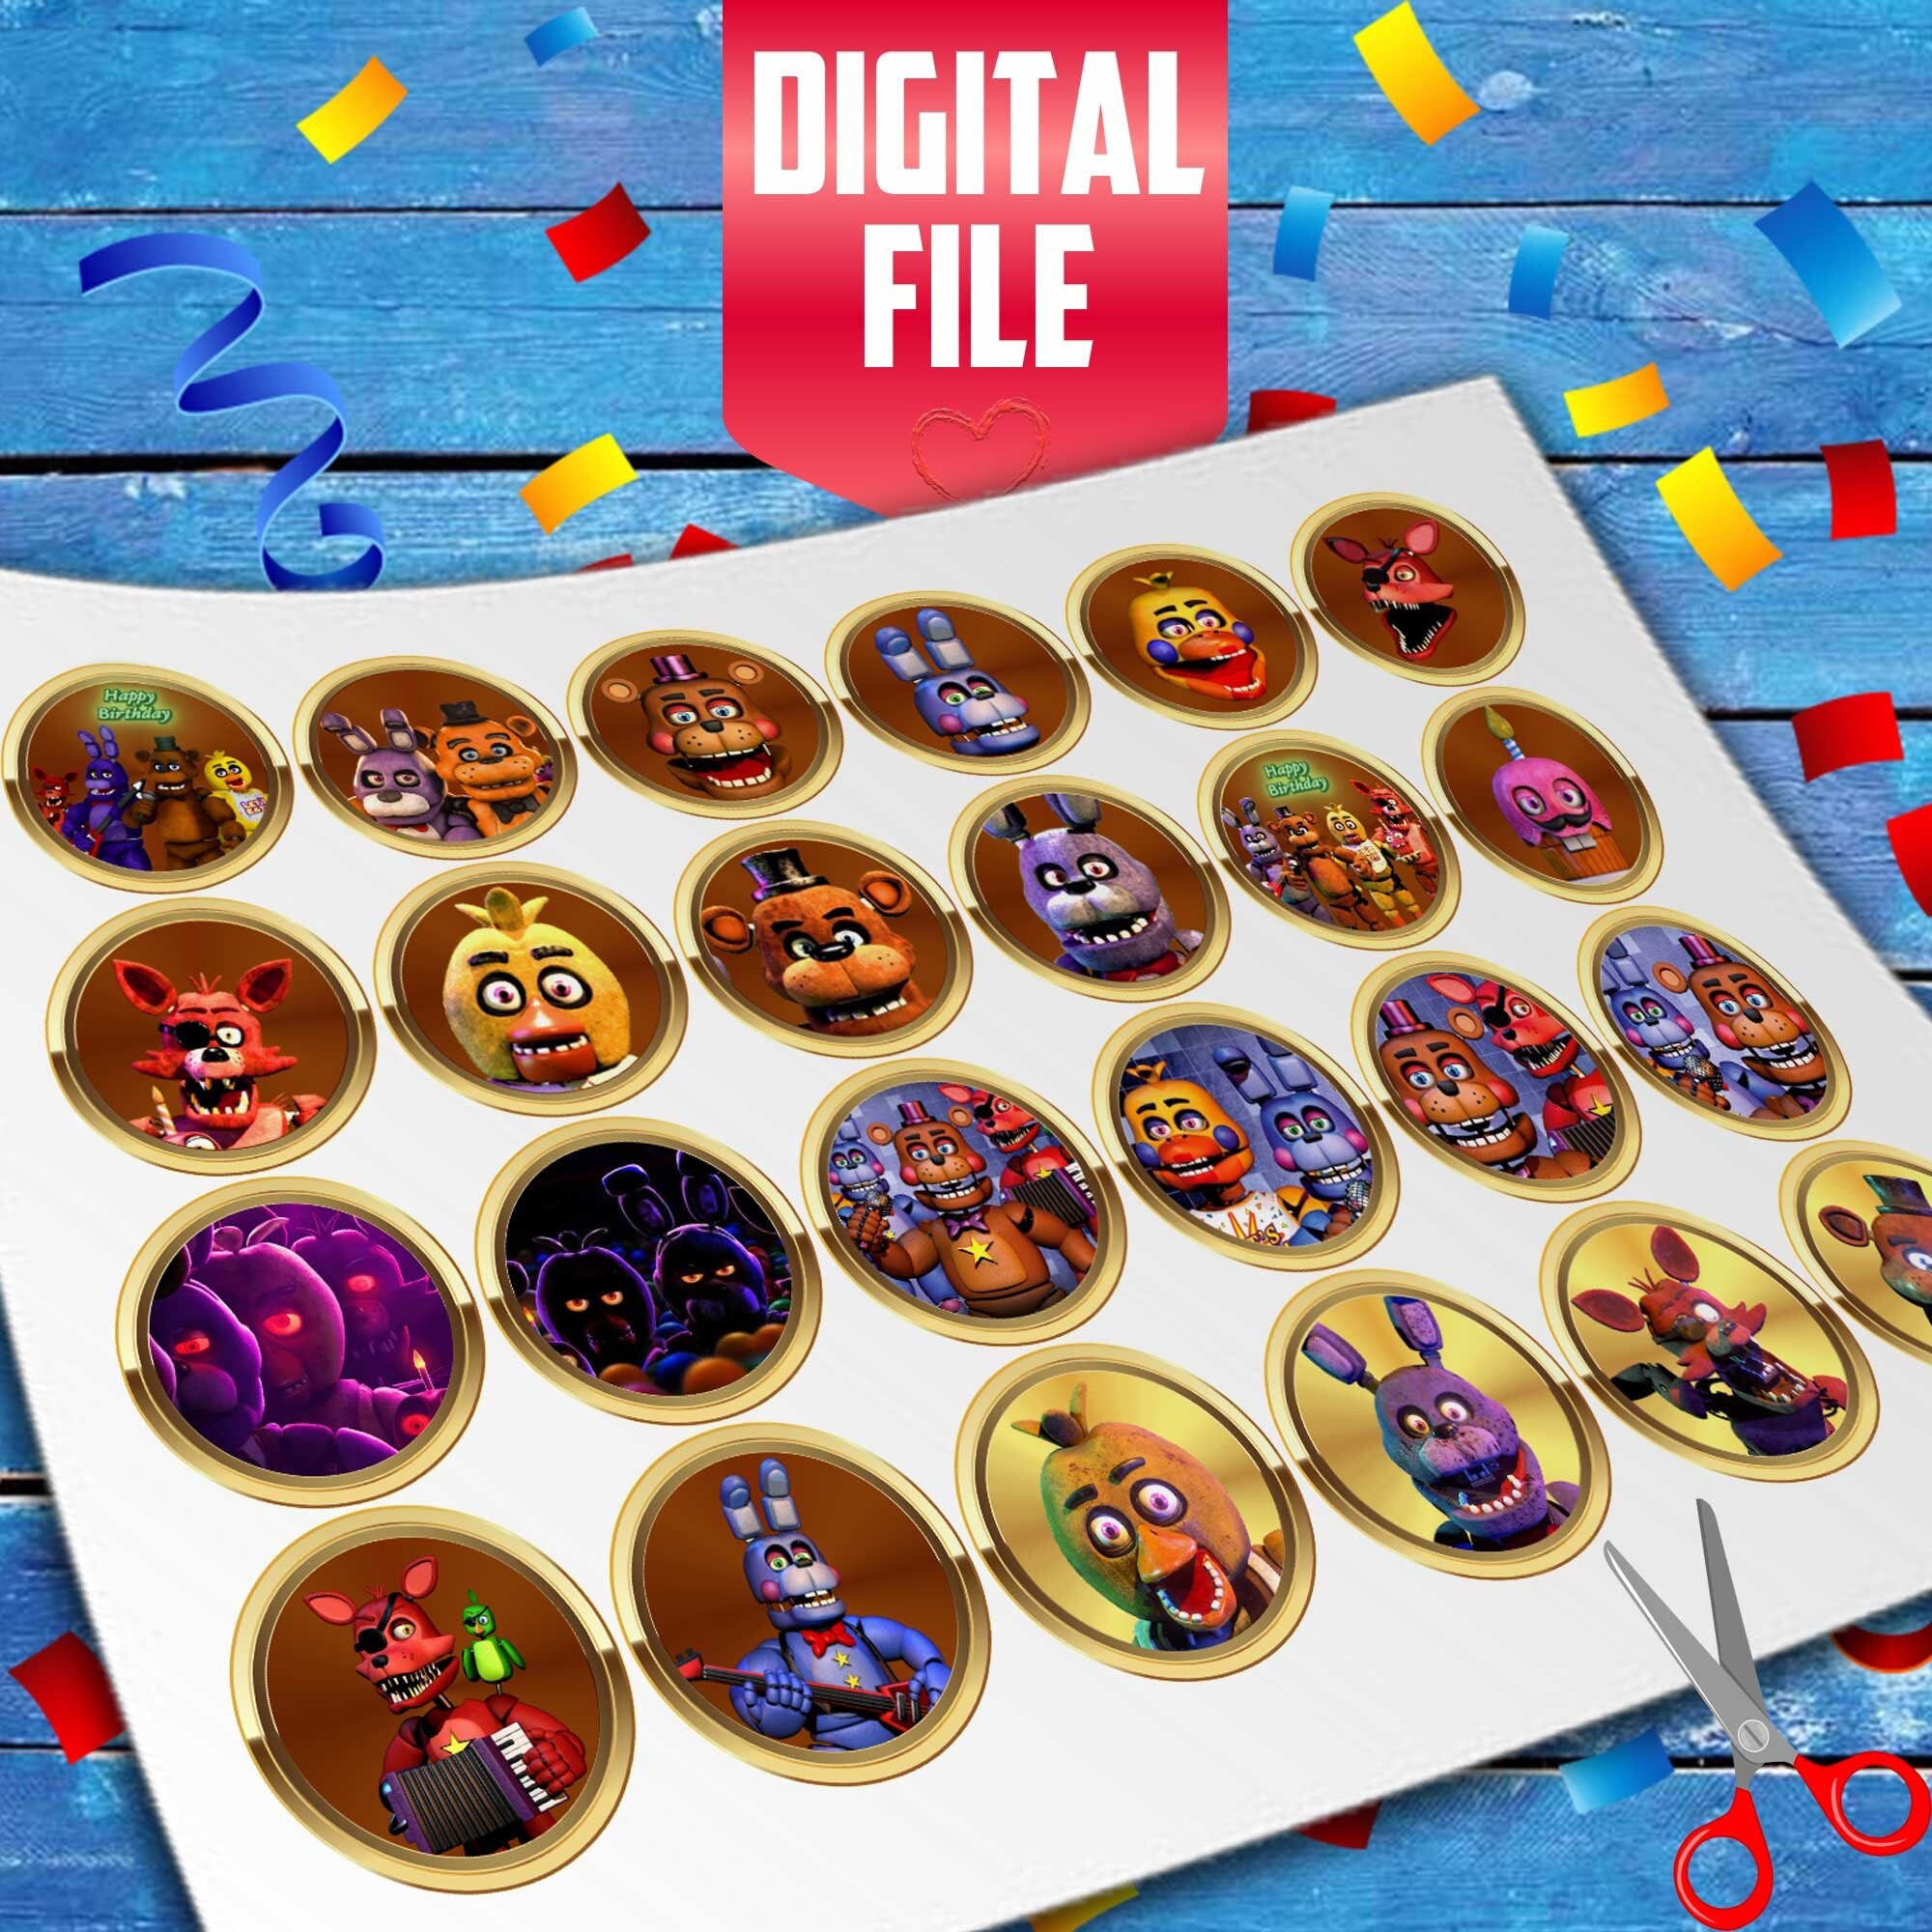 Random Treasures - Prepping for my daughter's birthday party. It's a FNAF  theme and these are stickers that will go in their goodie bags!  #themedstickers #customstickers #bdaygiveaway #daughtersbirthday